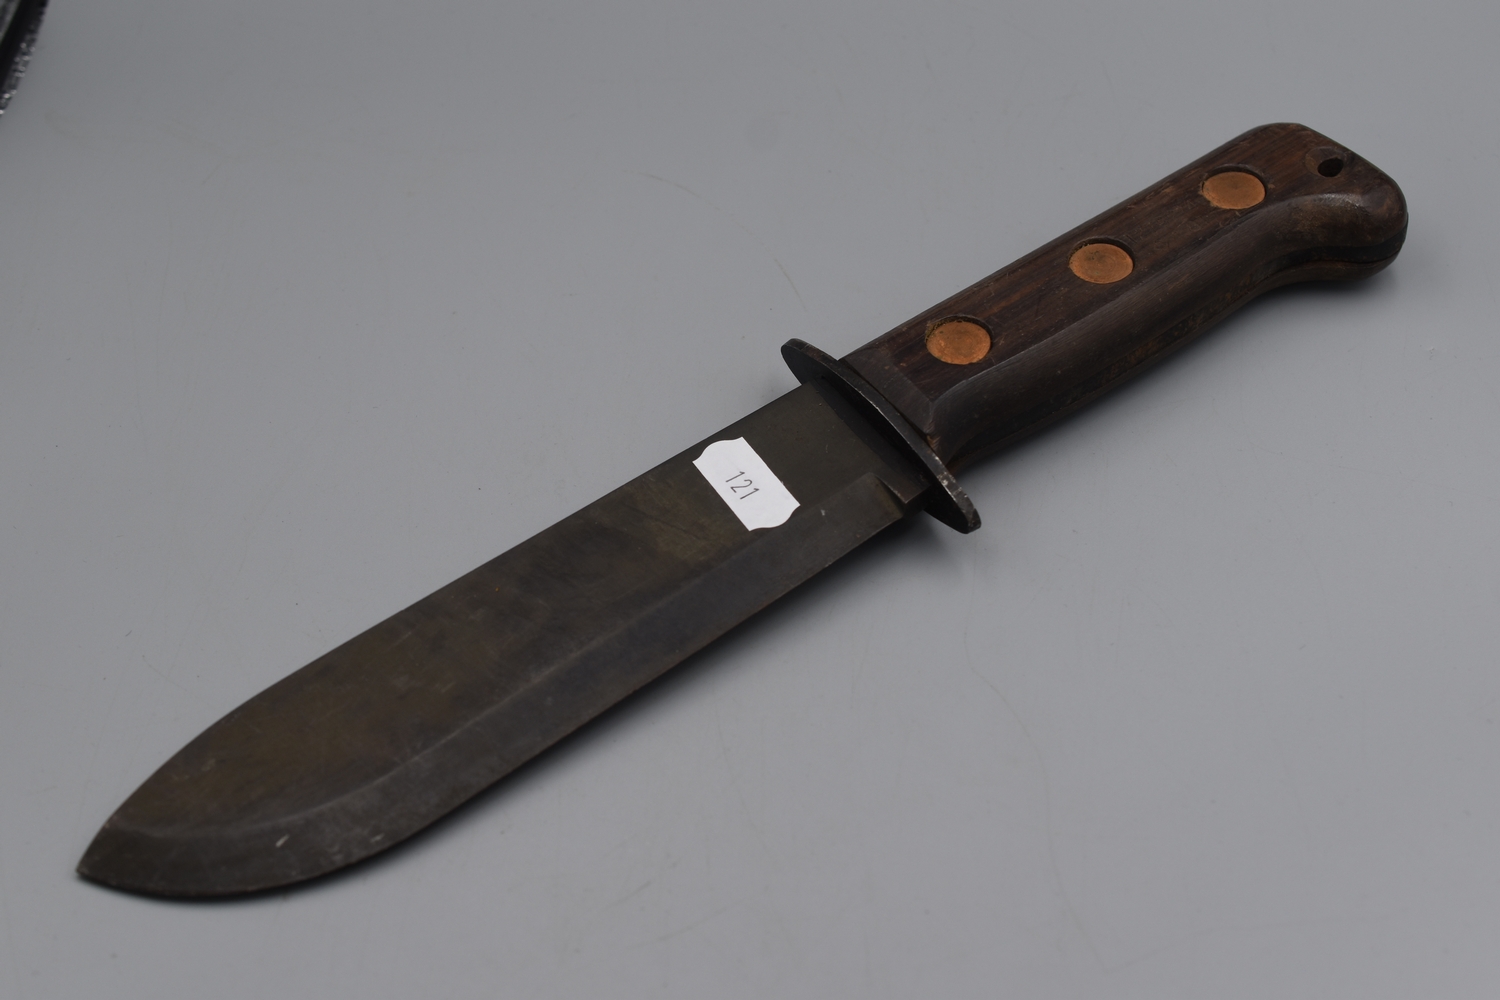 british army survival knife